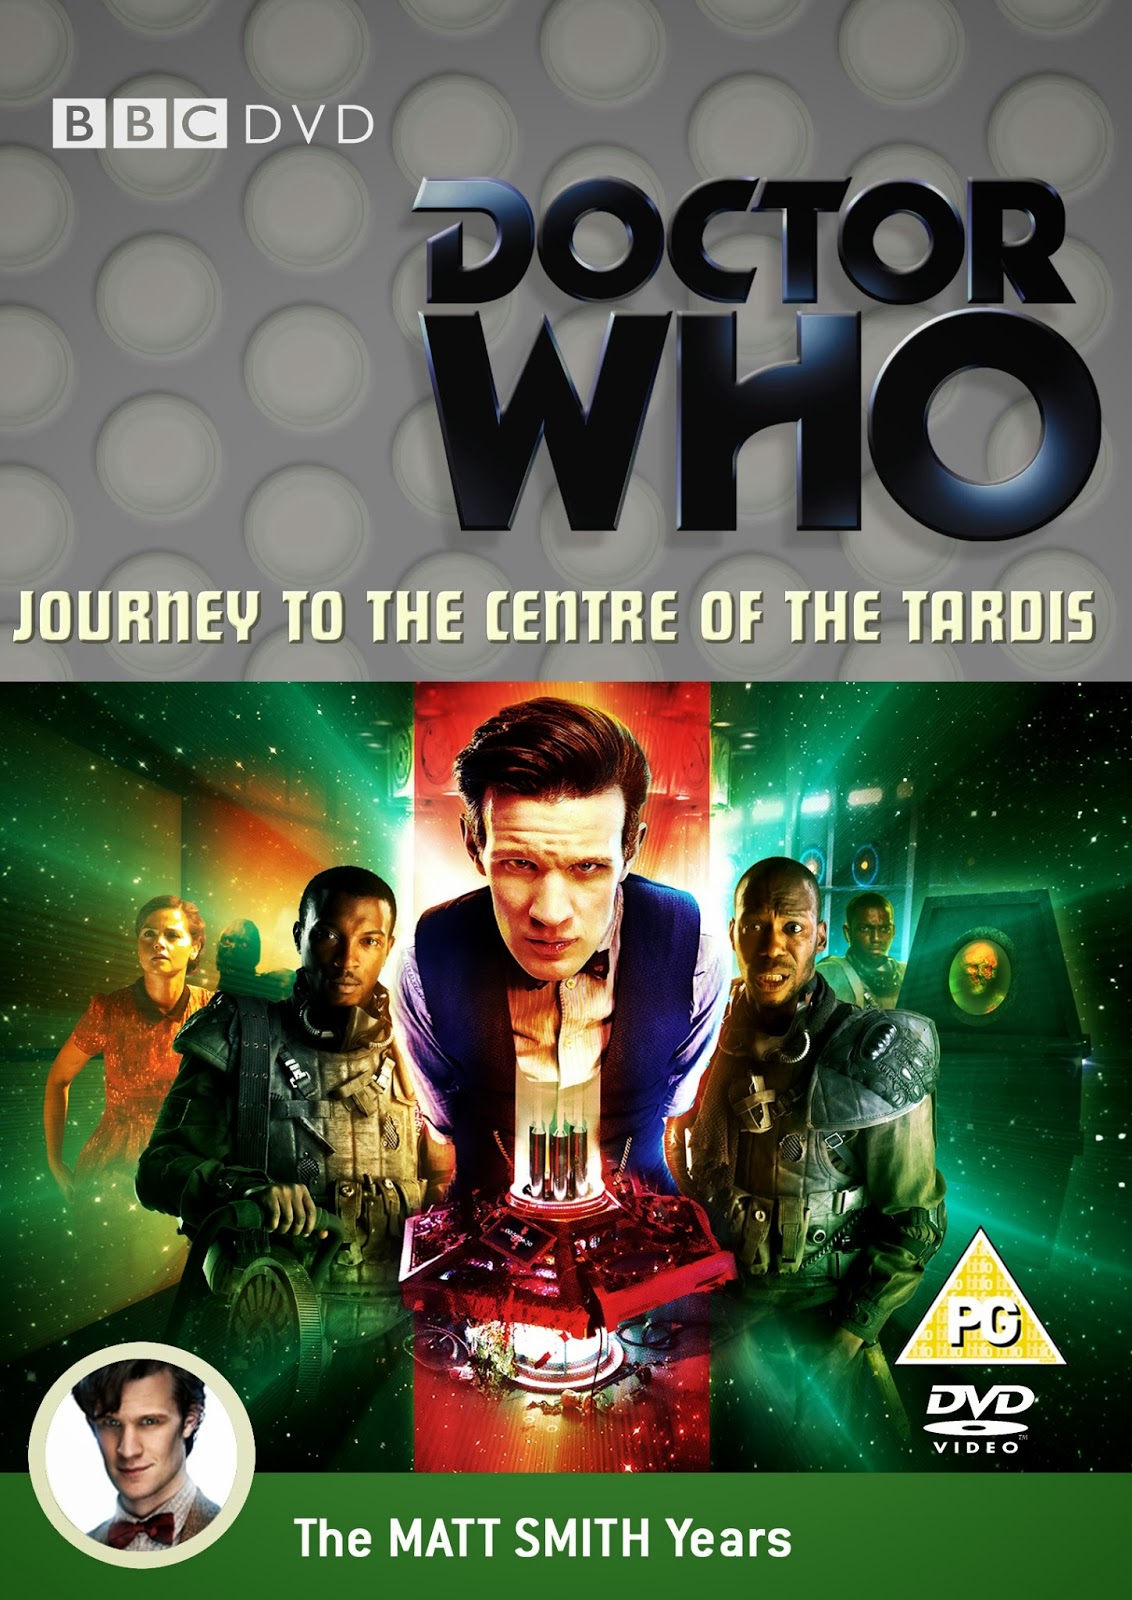 doctor who journey into time